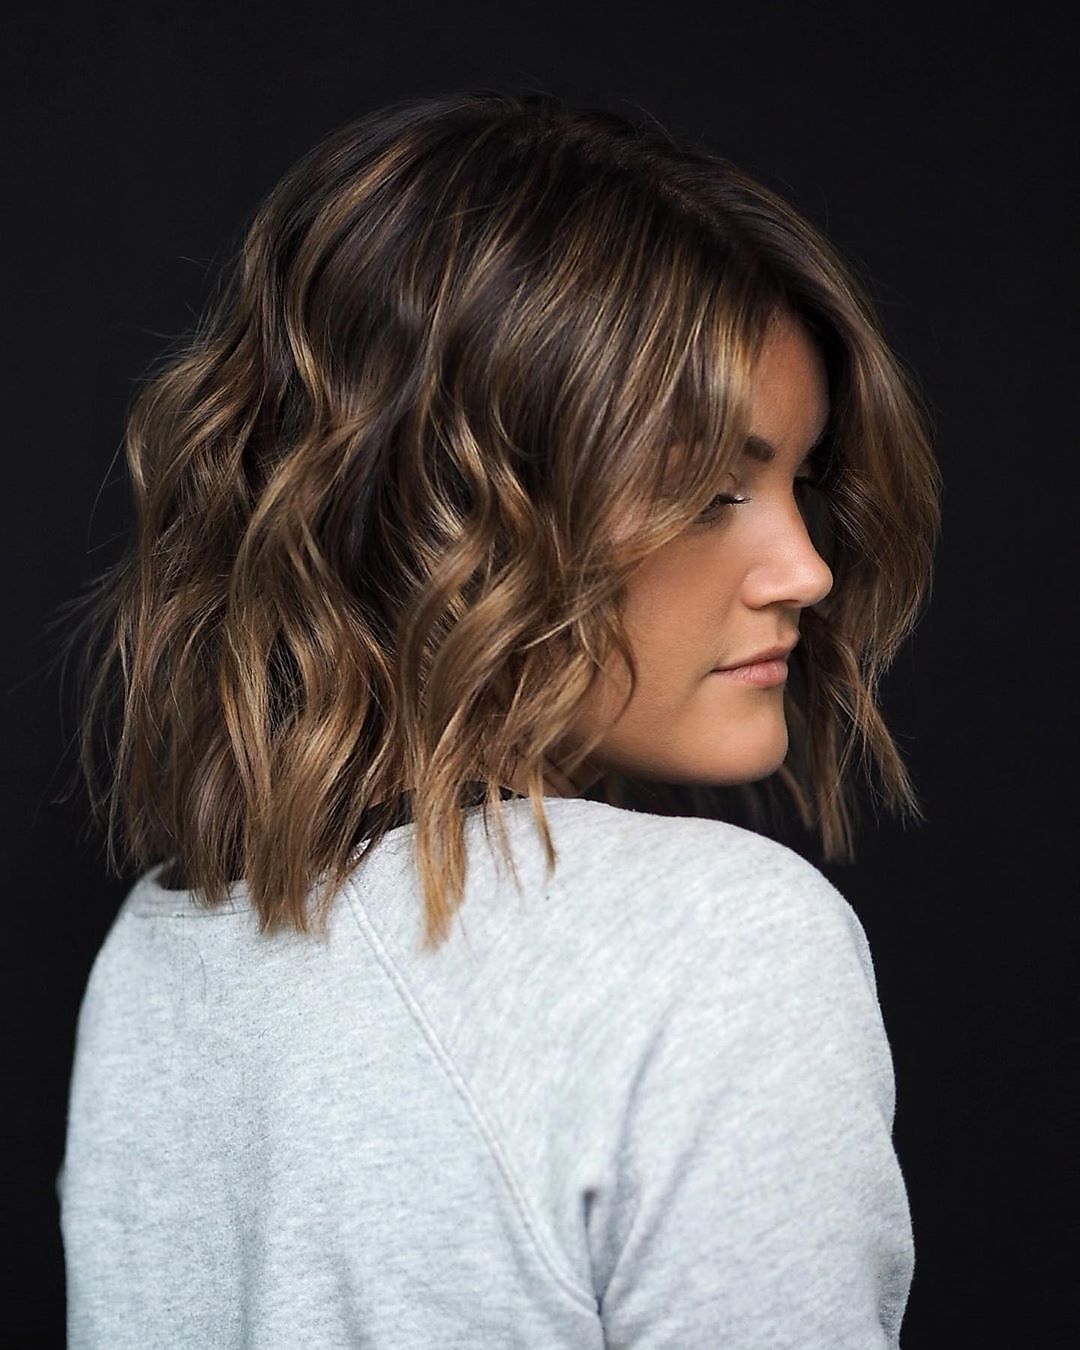 Schwarzkopf Professional - This brunette's got some serious TEXTURE! 👌
*Formula* 👉 @hairbylindal with #IGORAVIBRANCE:
Roots – 6-16 + 5-21 Lift – highlights with #BLONDME Toning – 7-4 + 6-16
#IGORA #MO...